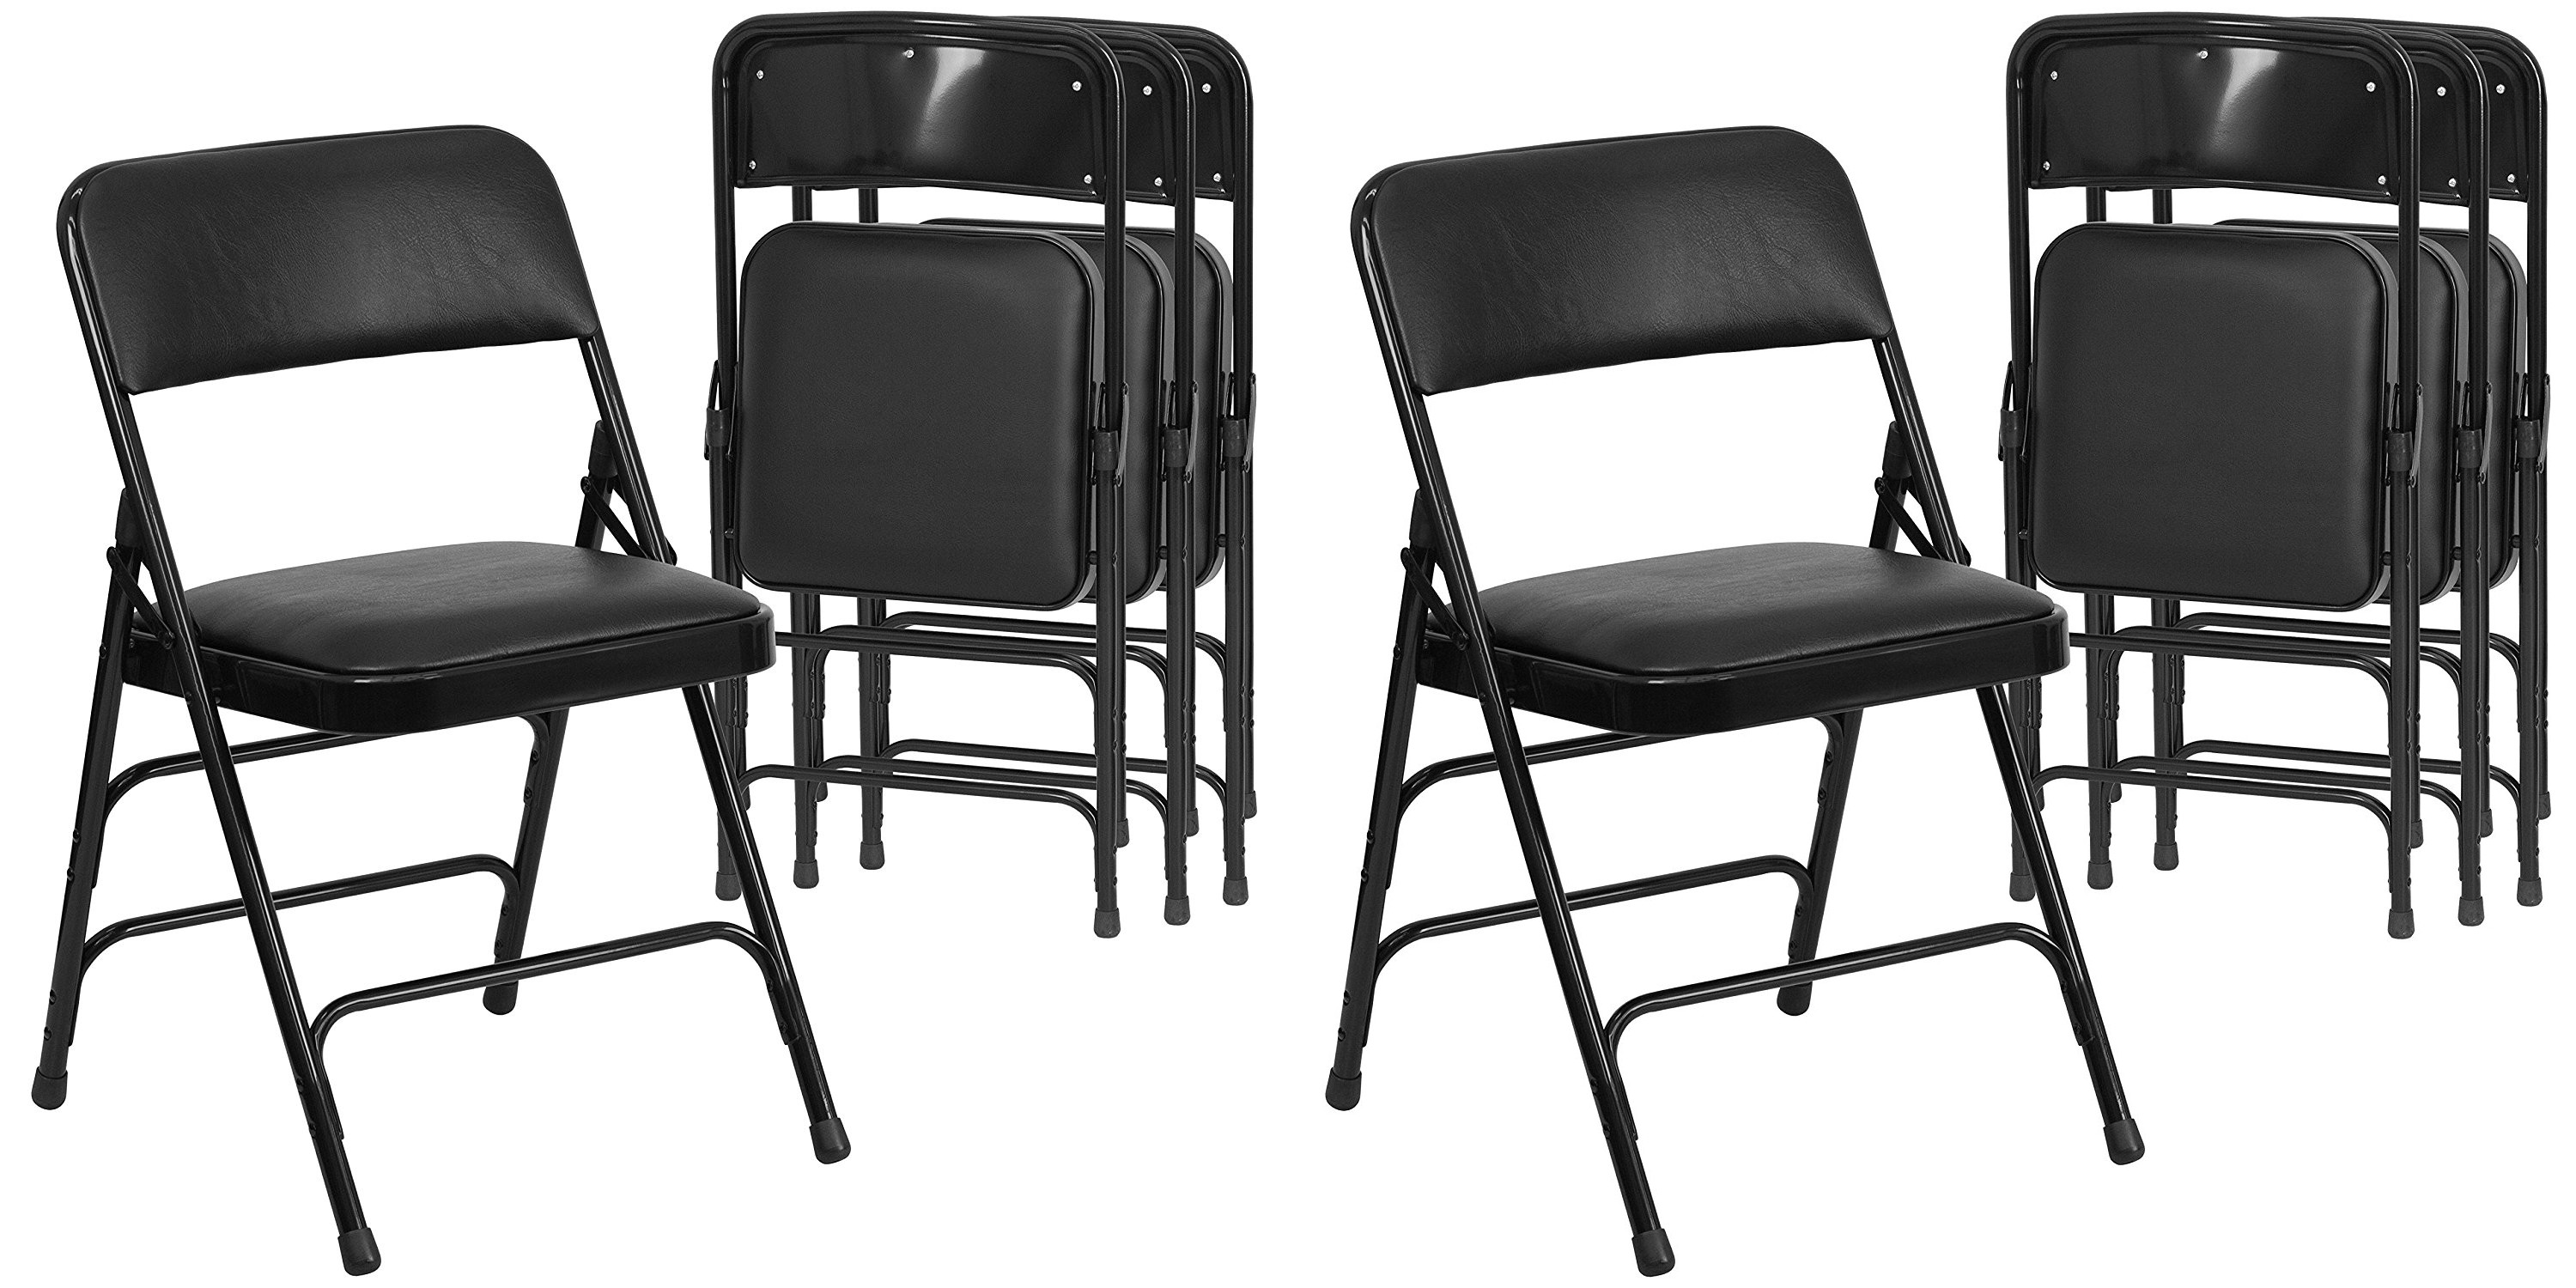 Hercules Series Curved Triple Braced Double Hinged Black Vinyl Upholstered Metal Folding Chair ?quality=82&strip=all